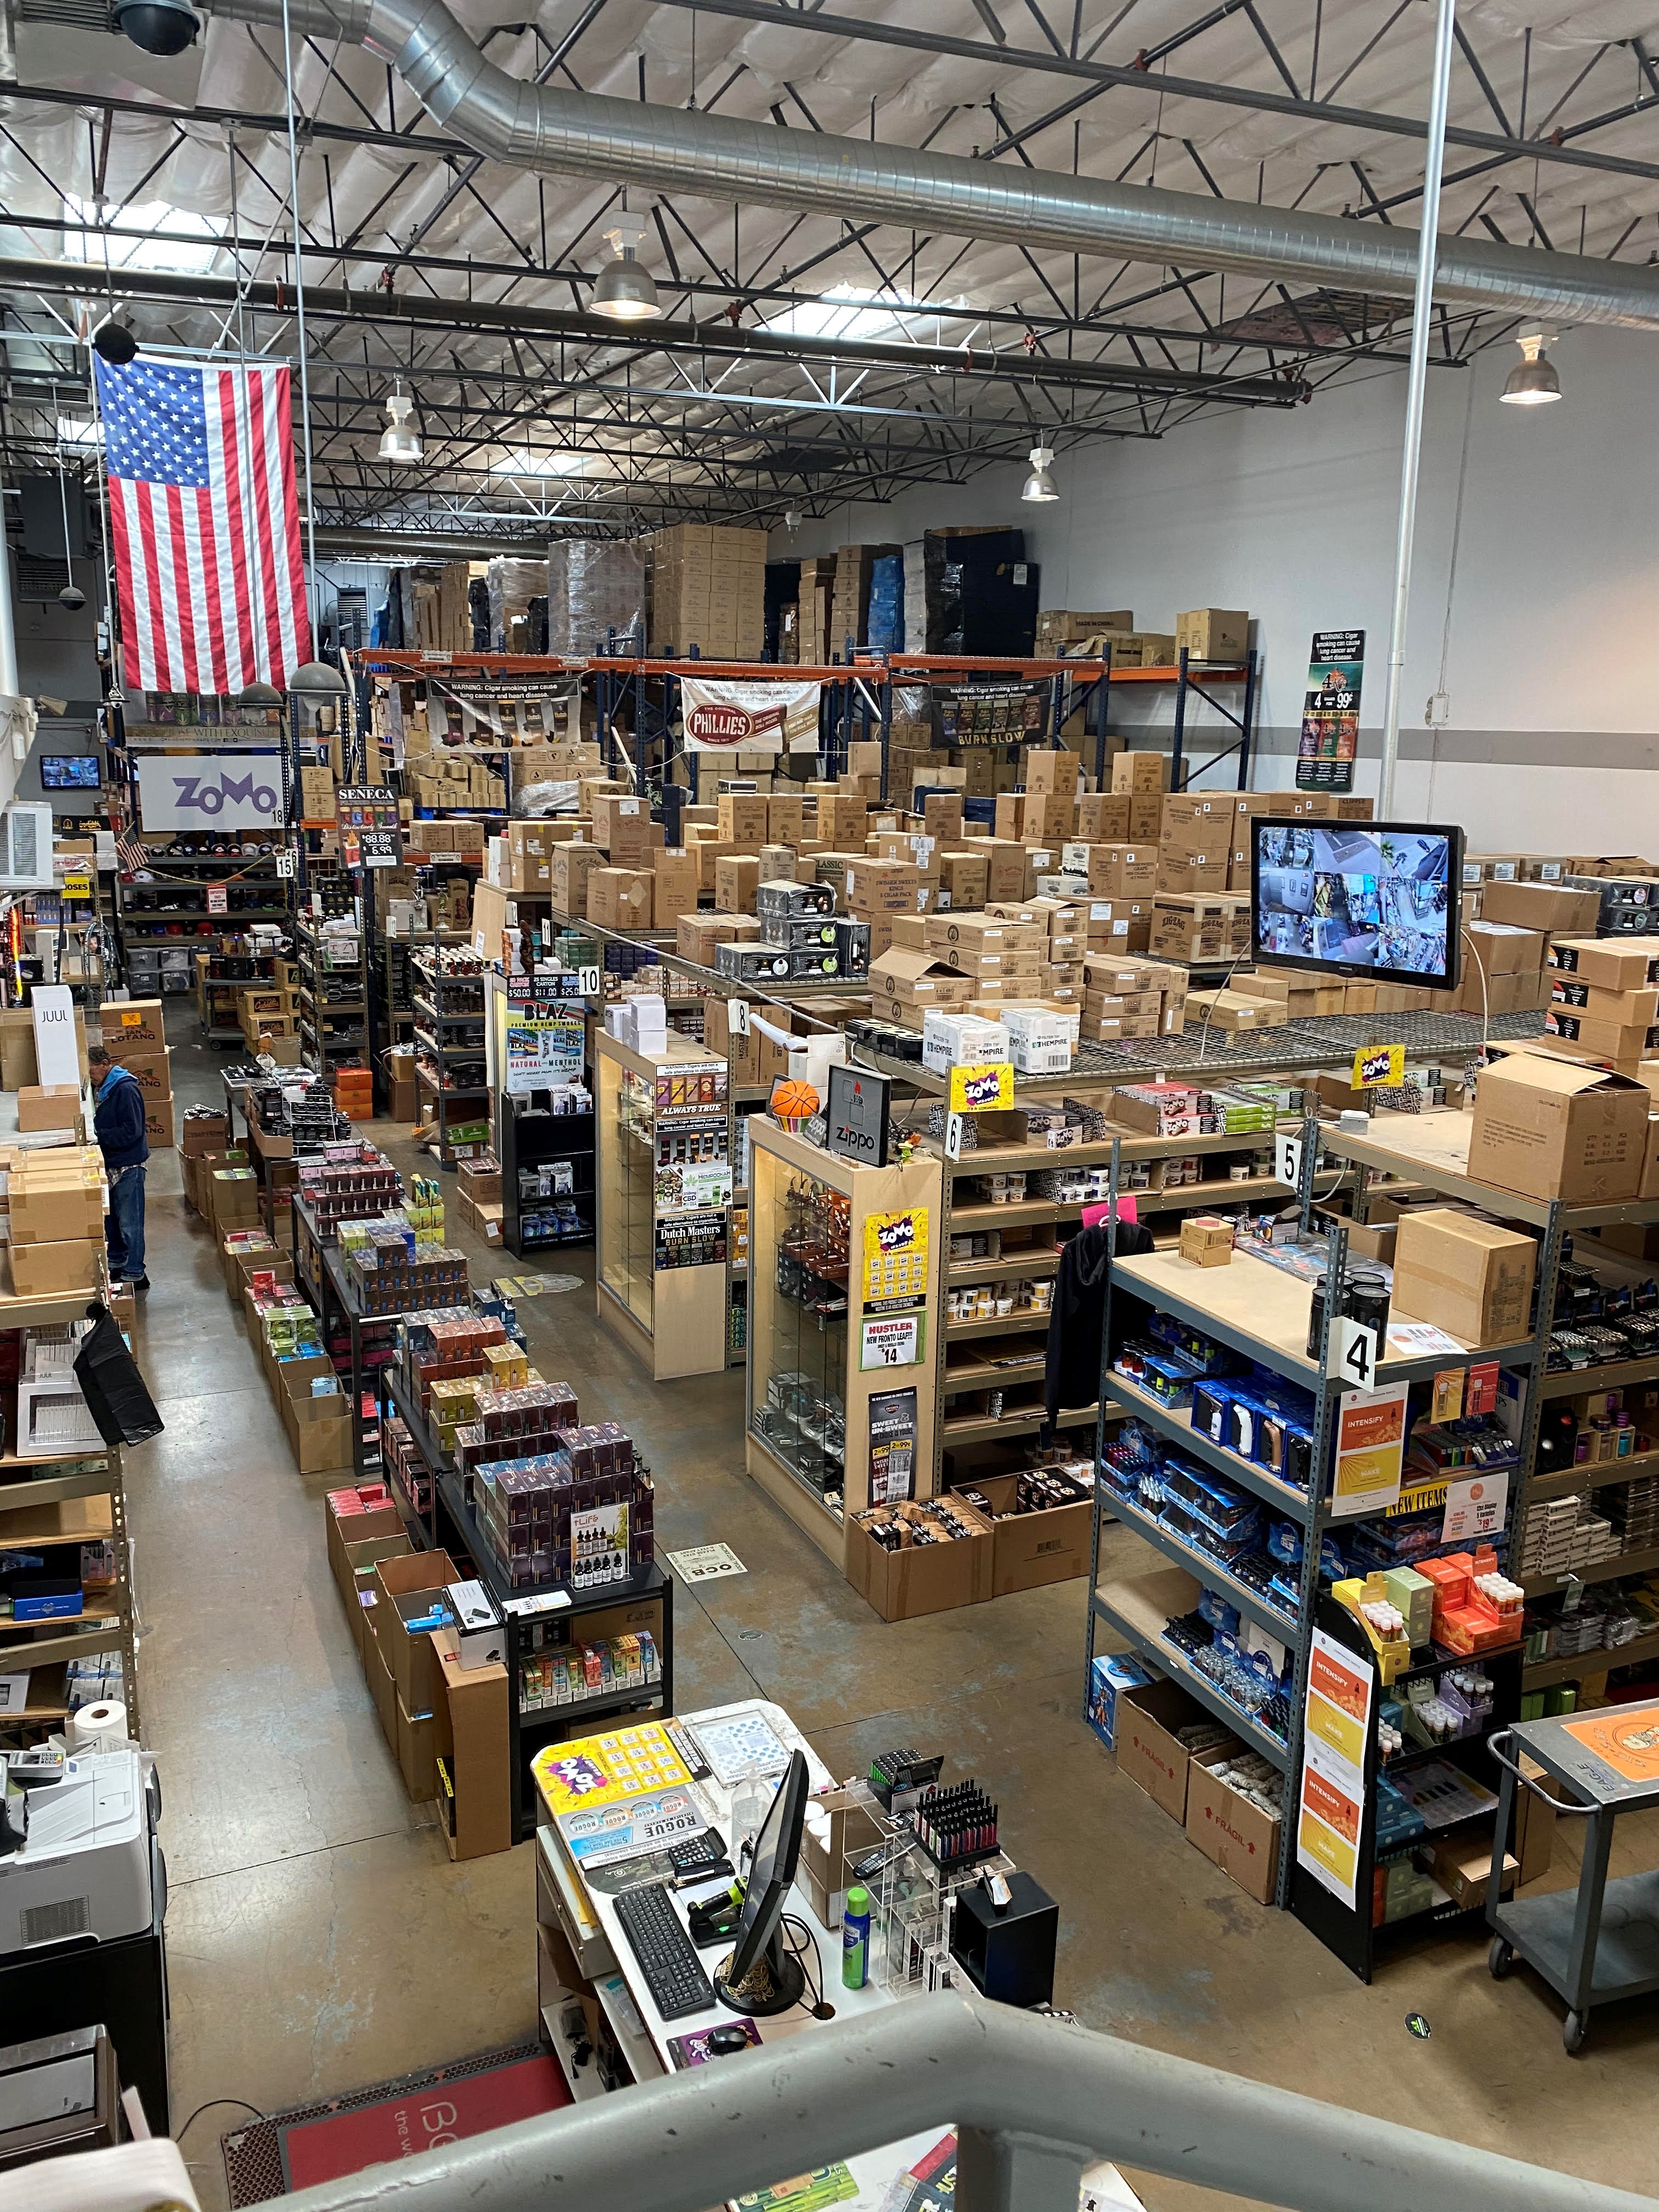 The two-story property is comprised of warehouse racking space, retail space, and office space located on the second floor, and sells over 2,000 different tobacco and tobacco-related accessory products. 